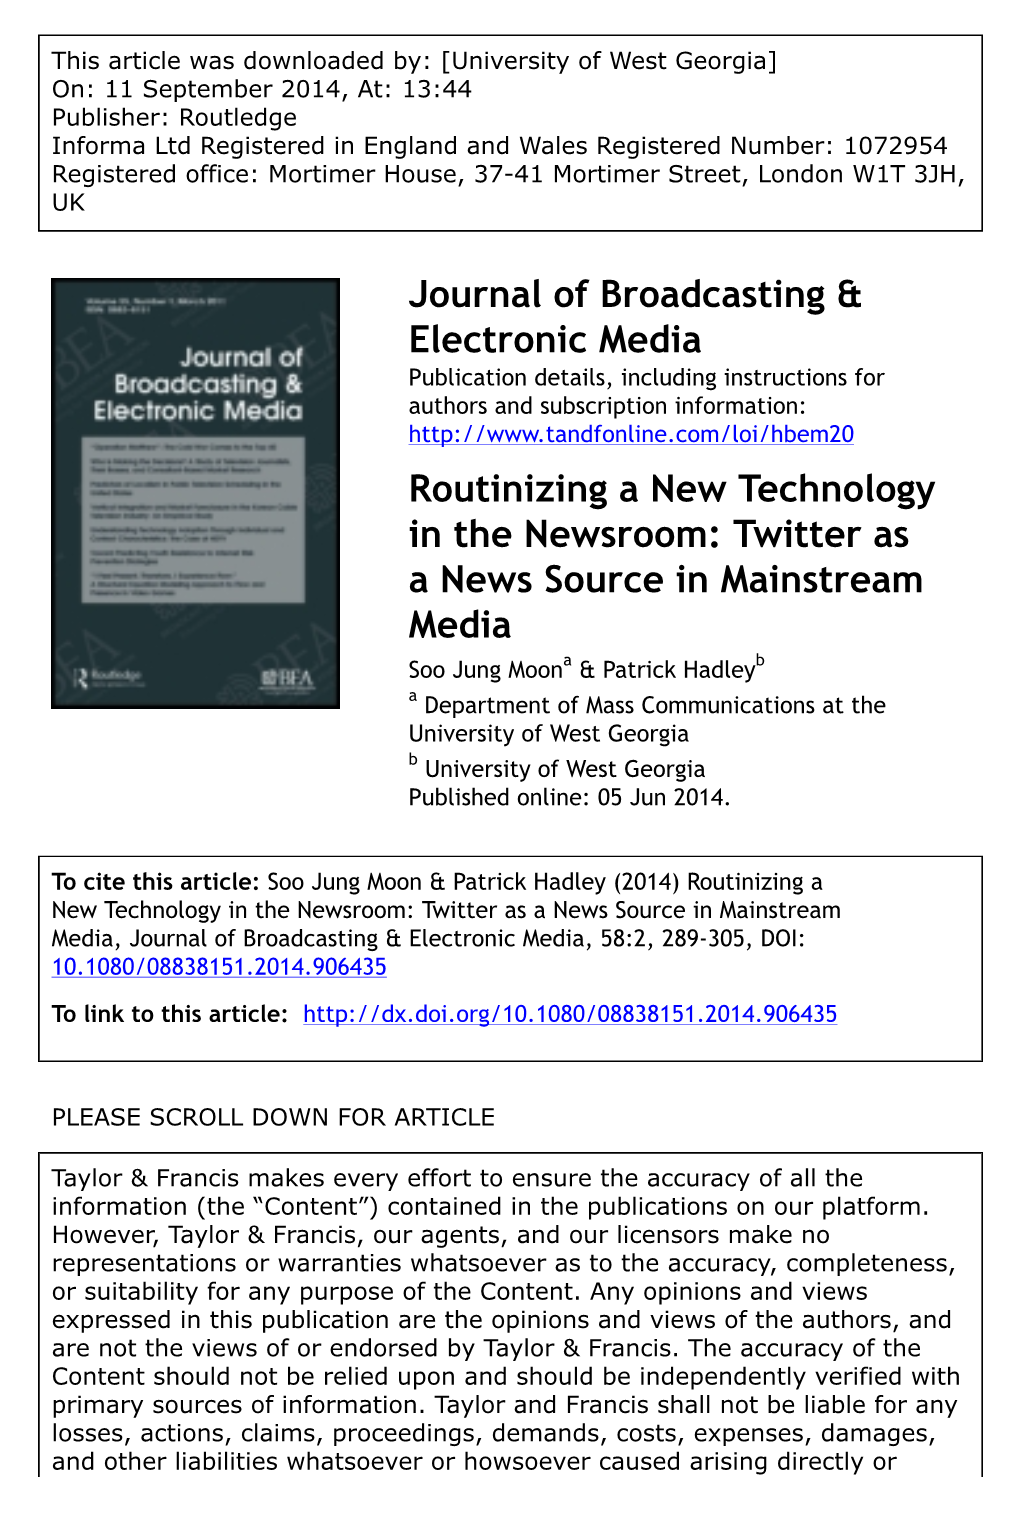 Journal of Broadcasting & Electronic Media